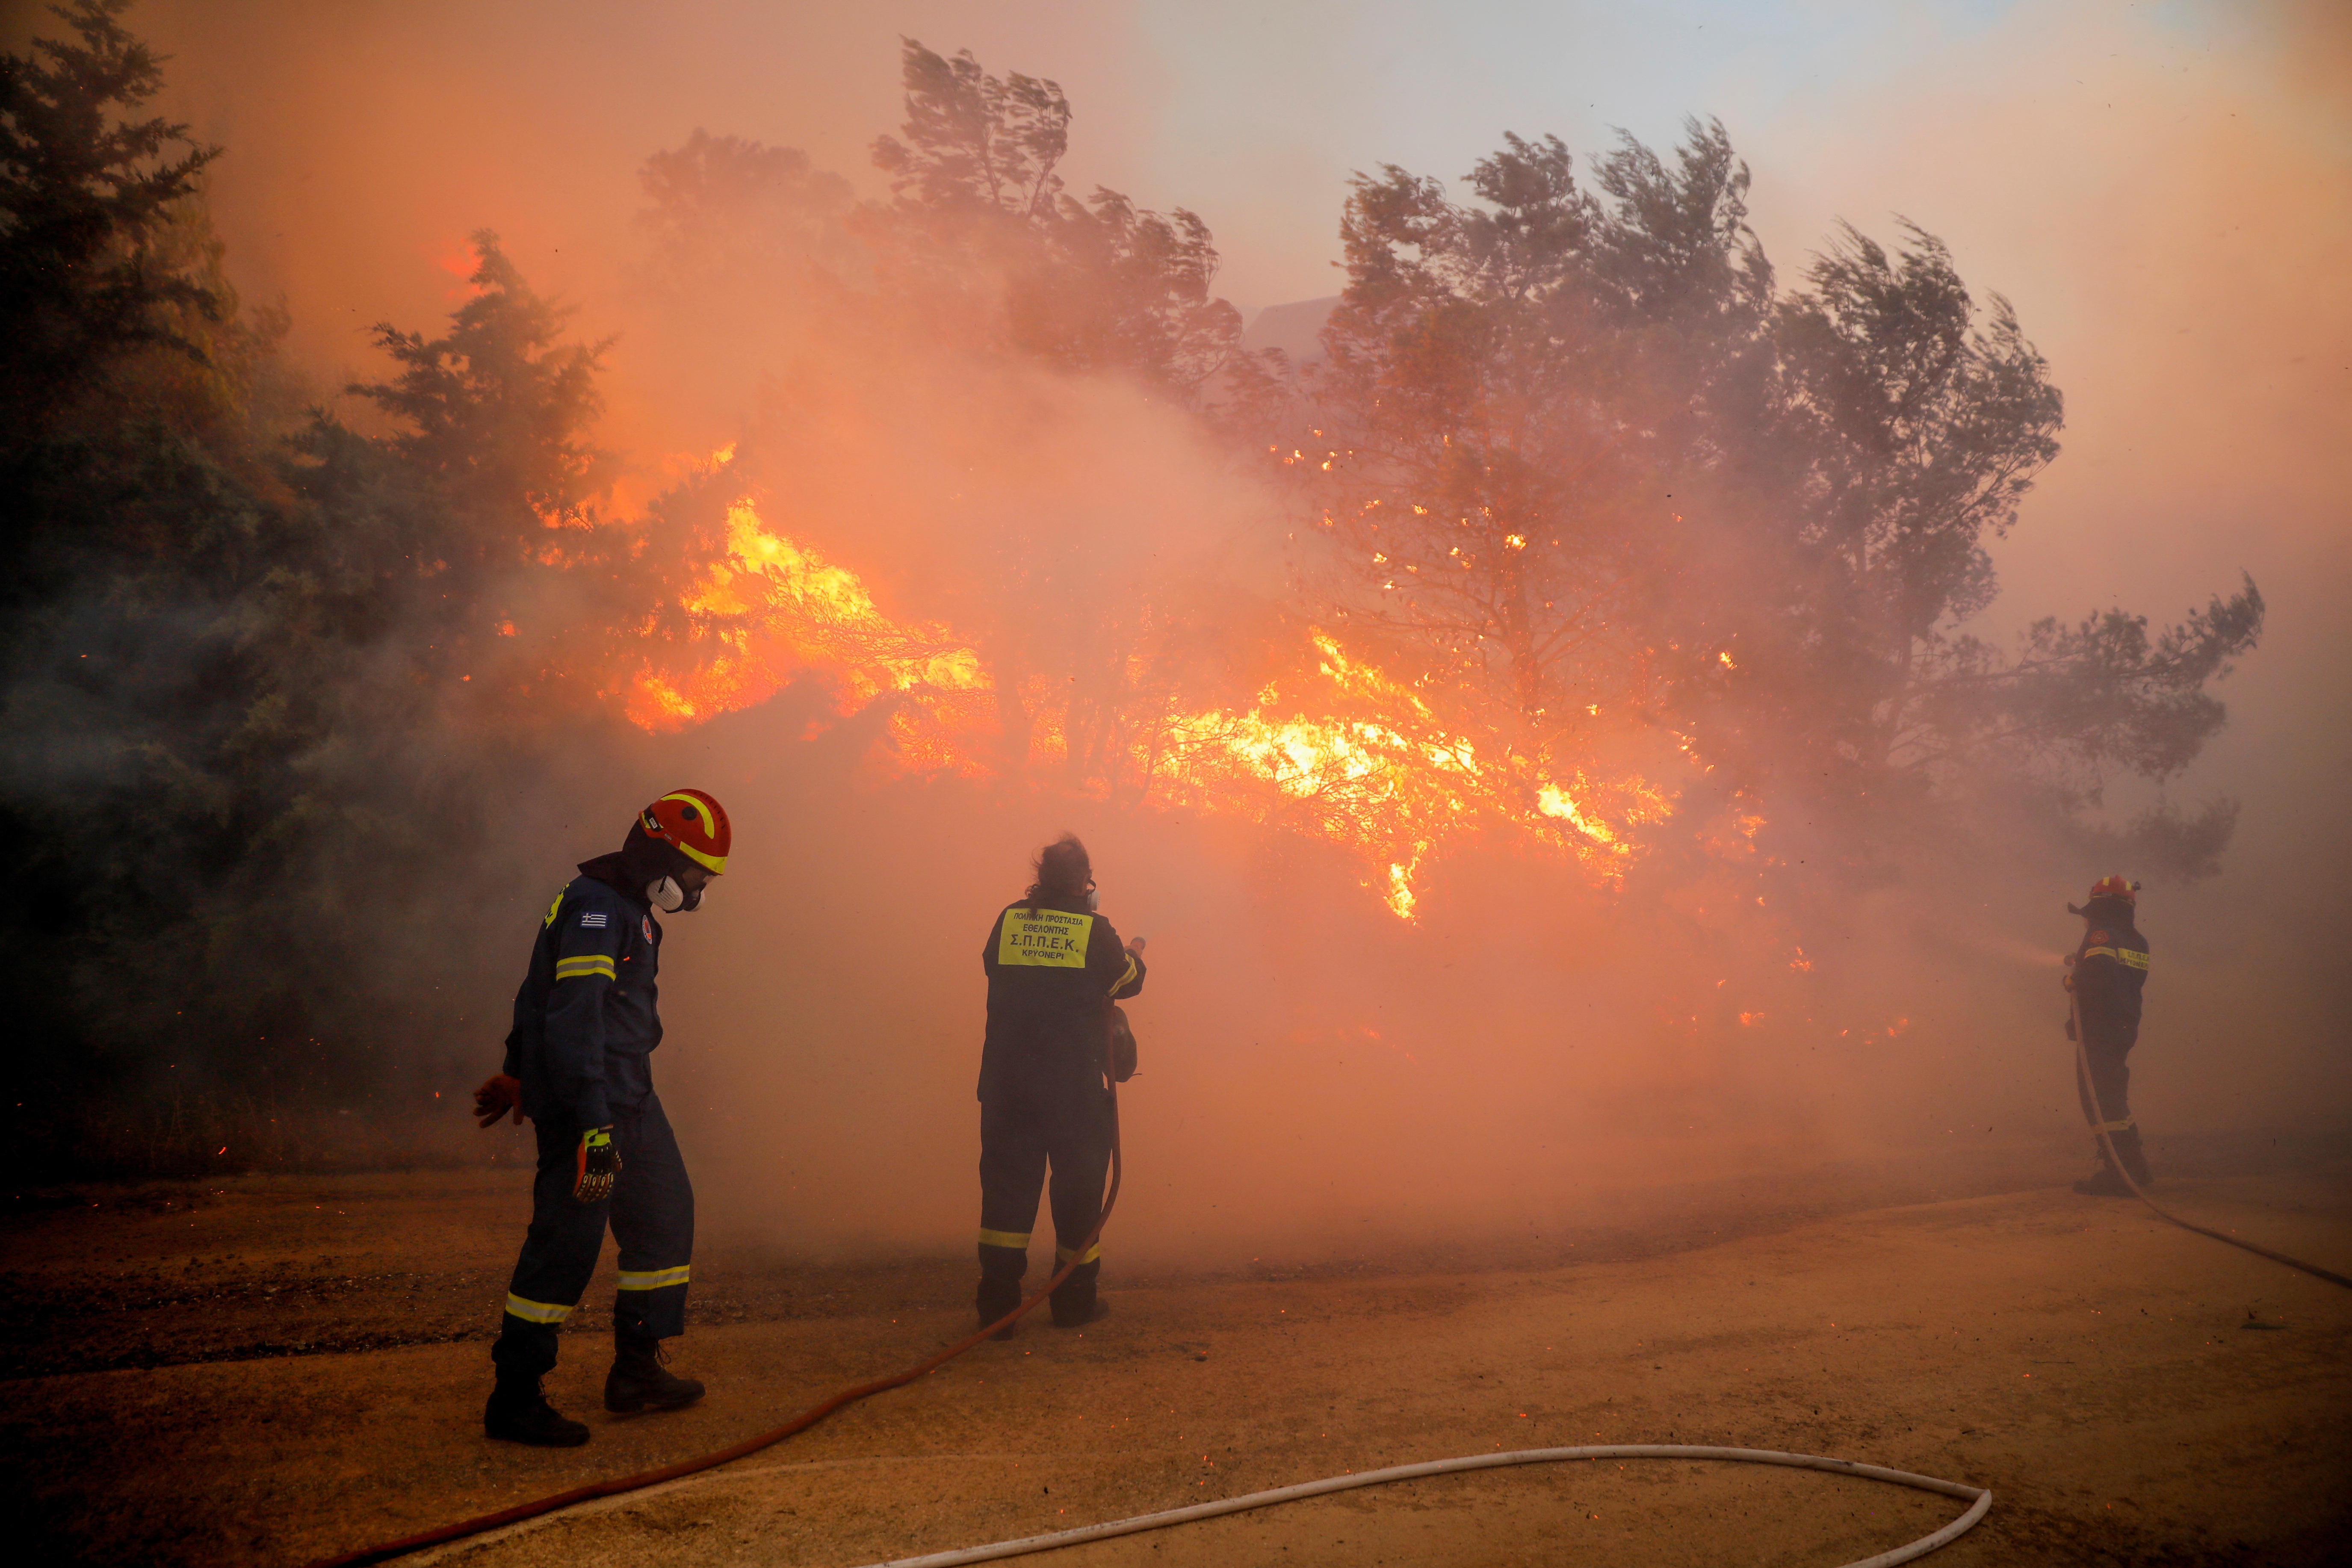 Firefighters try to extinguish a wildfire burning in Ntrafi, Athens